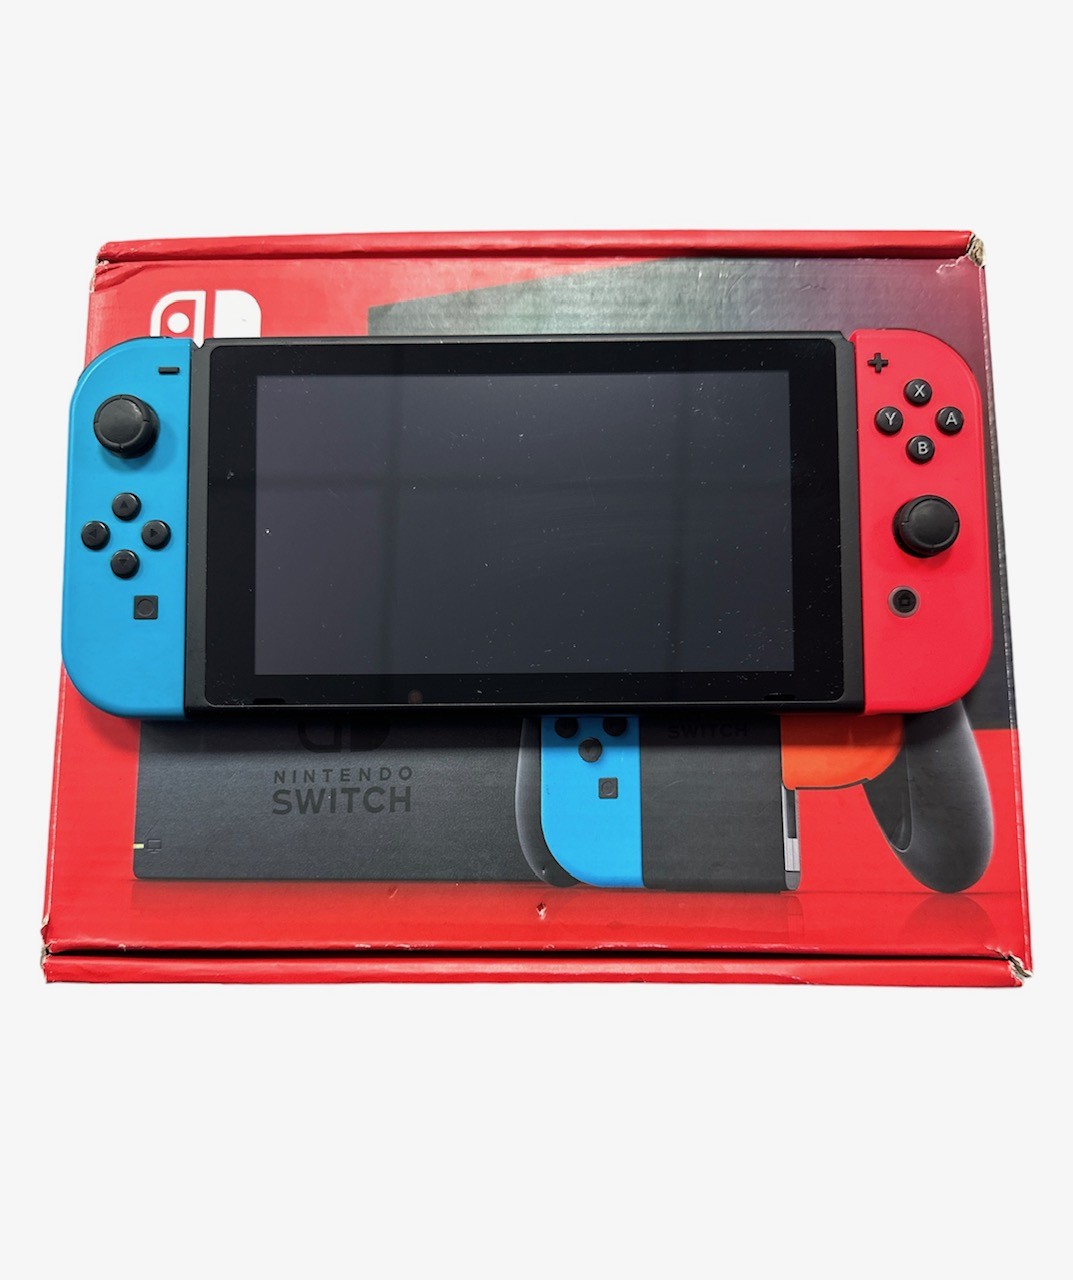 Nintendo Switch Boxed Console - Red/Blue - Includes charger/dock